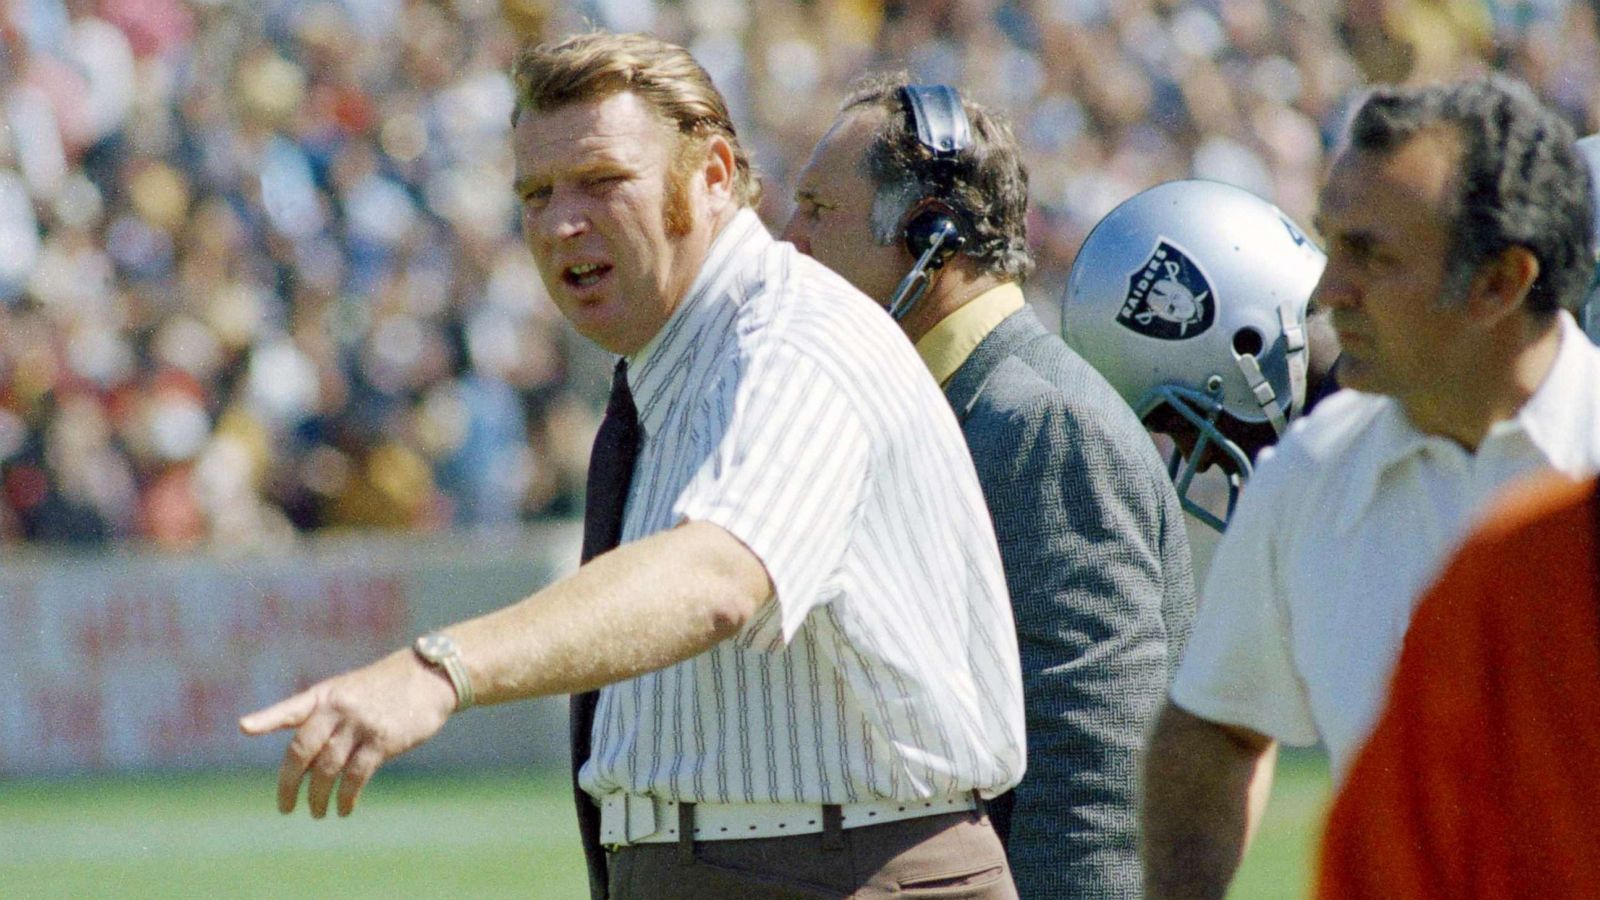 John Madden, former Hall of Fame NFL coach and broadcaster, dies at 85 -  ABC News